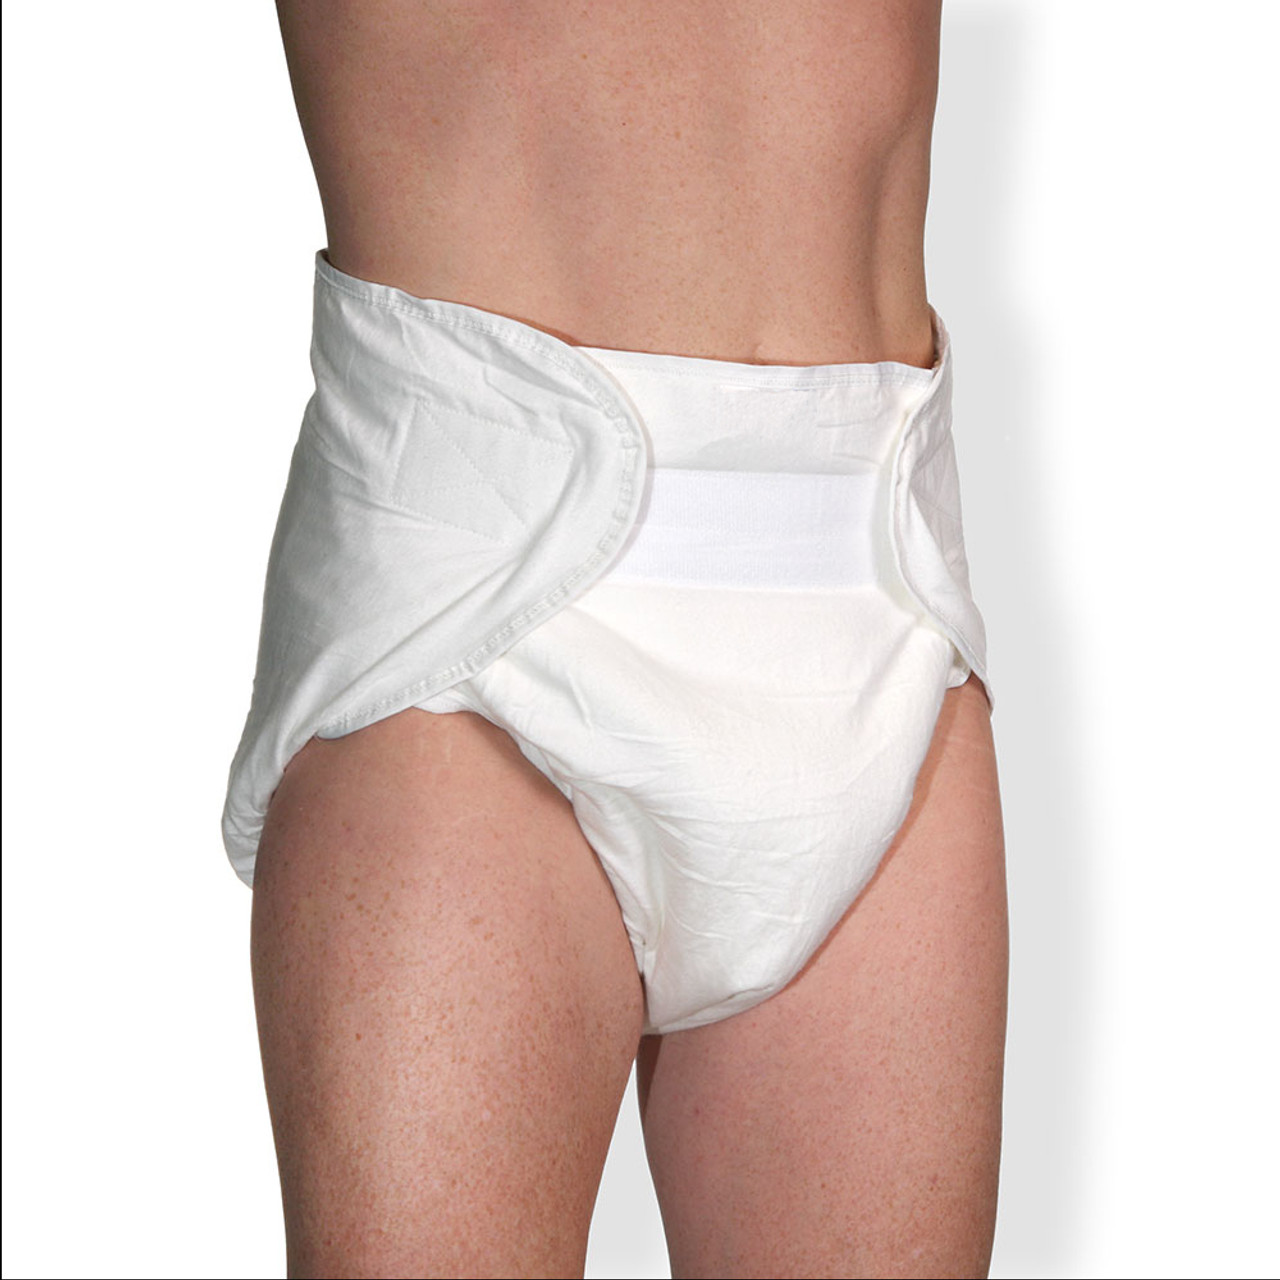 InControl Diapers - Whether wearing a cloth or disposable diaper